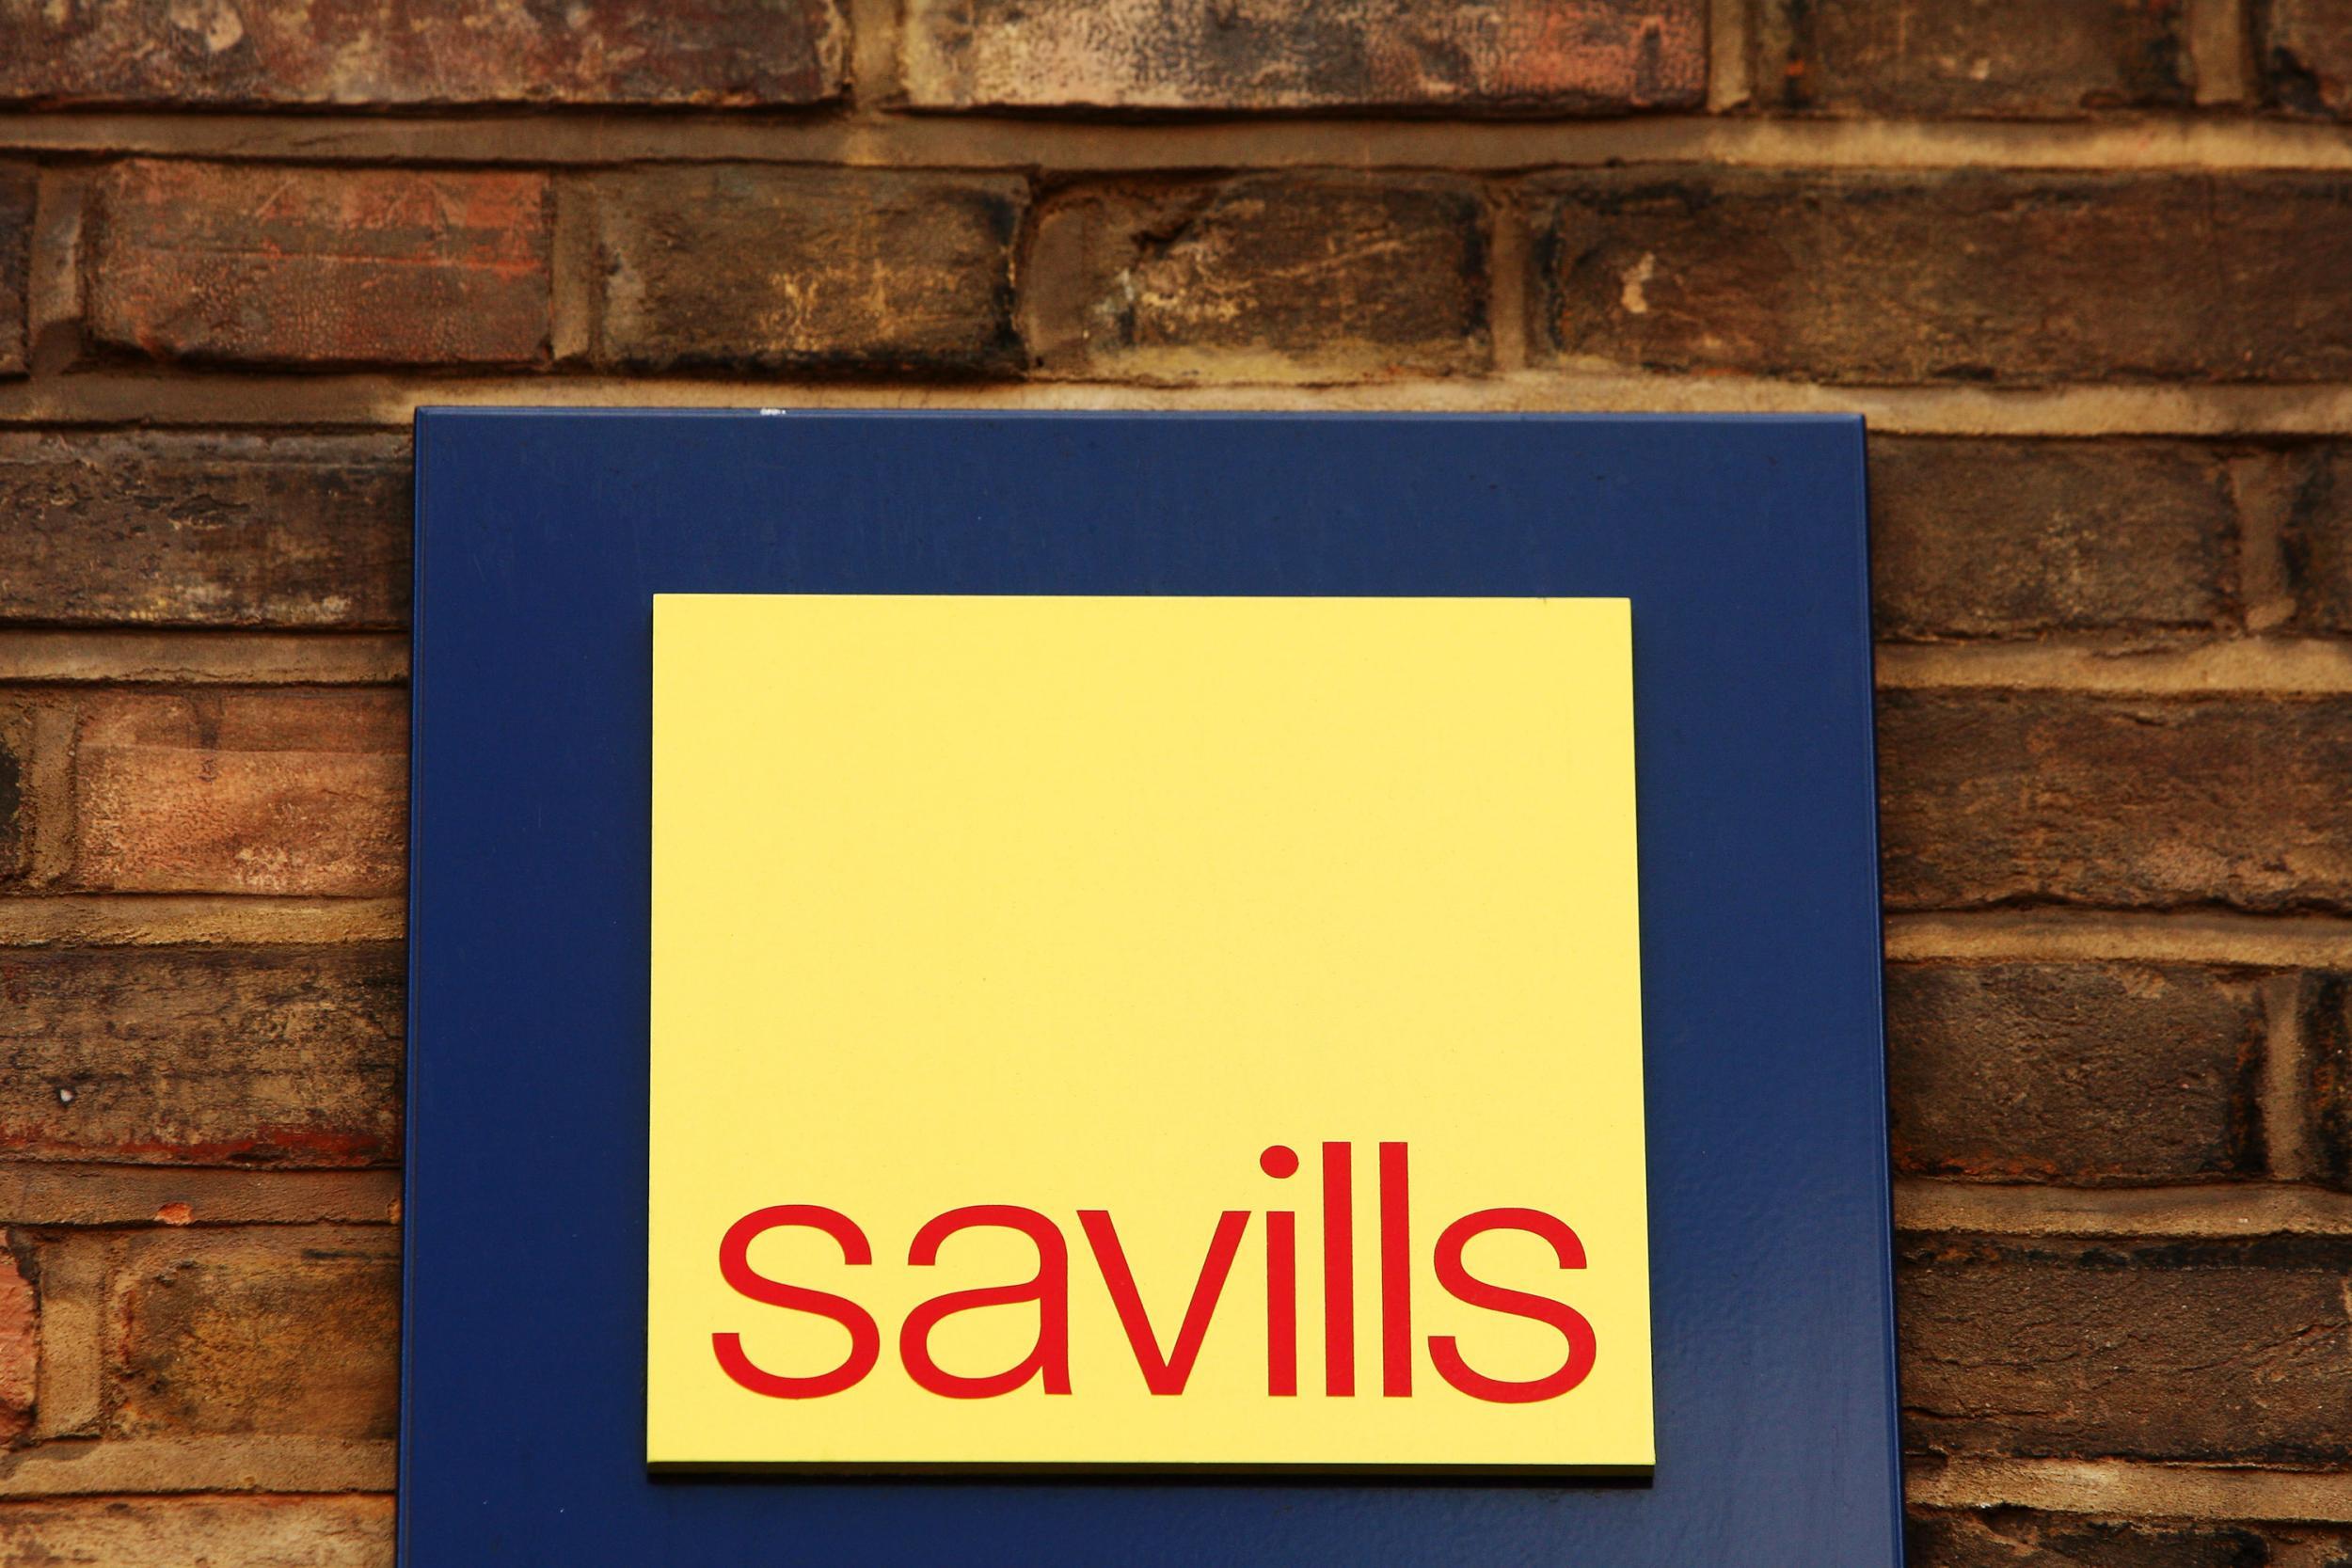 Despite the losses, Savills has weathered the Brexit storm better than several other estate agents